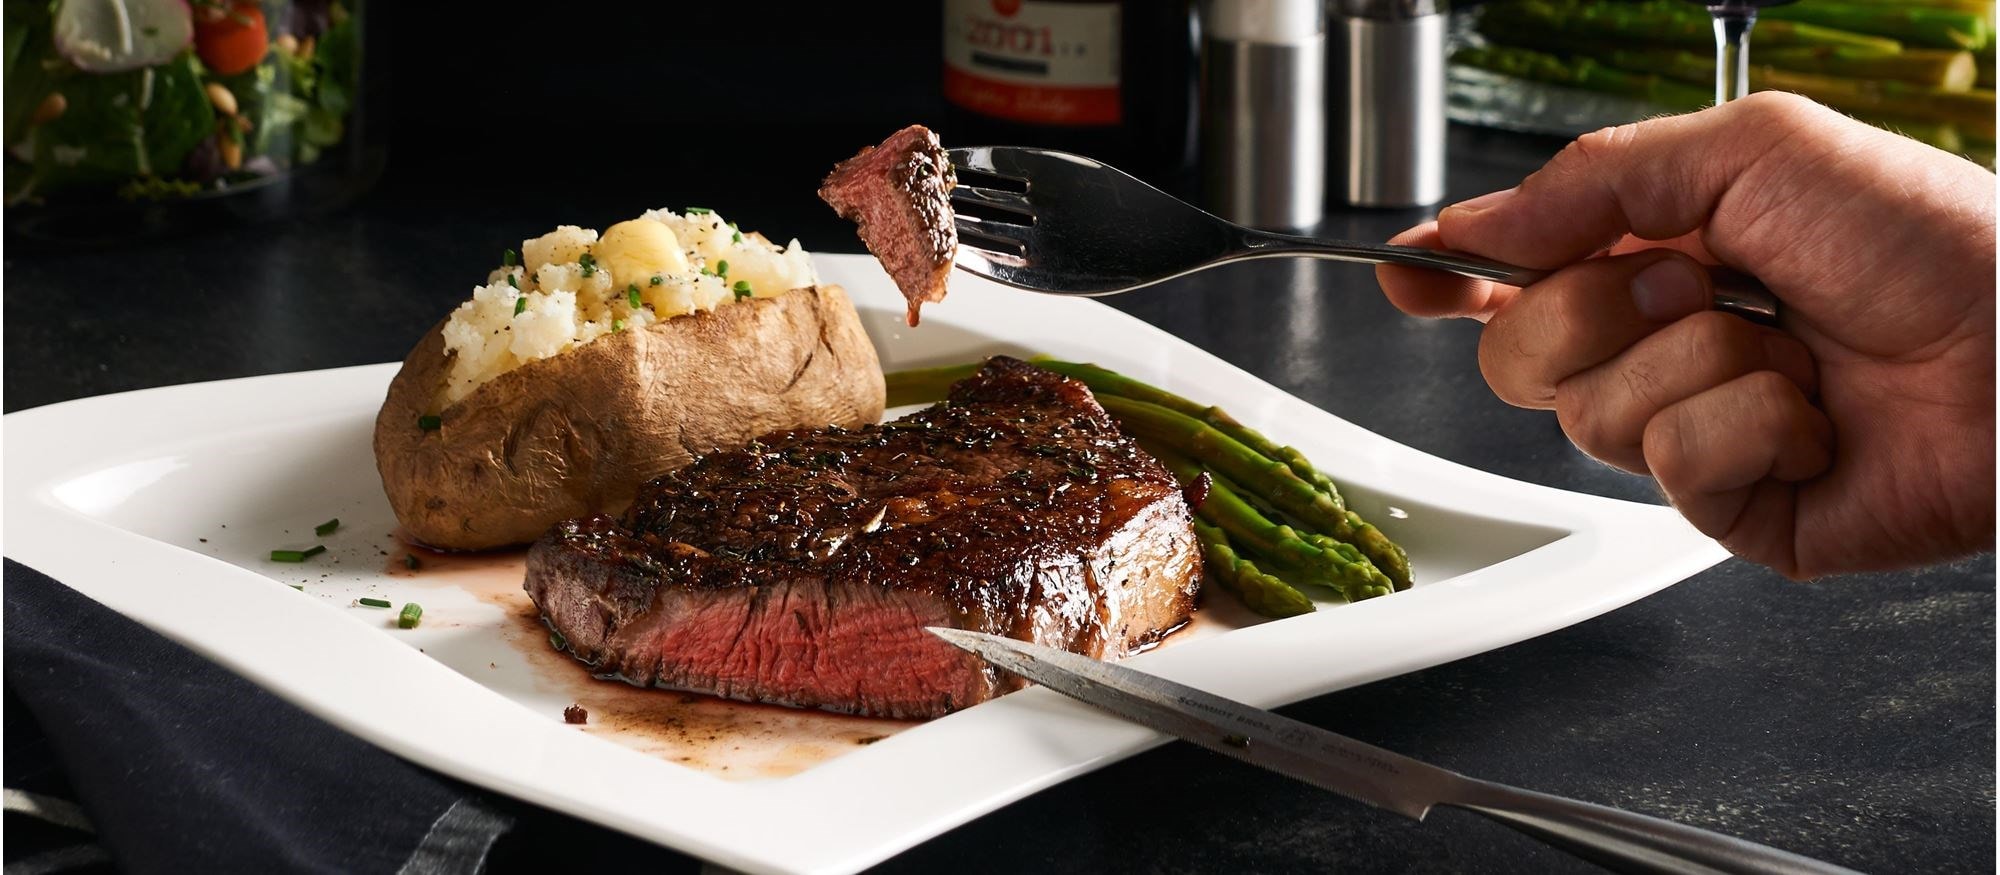 Tasty steak dinner is easy with the Wolf Vacuum Seal Drawer